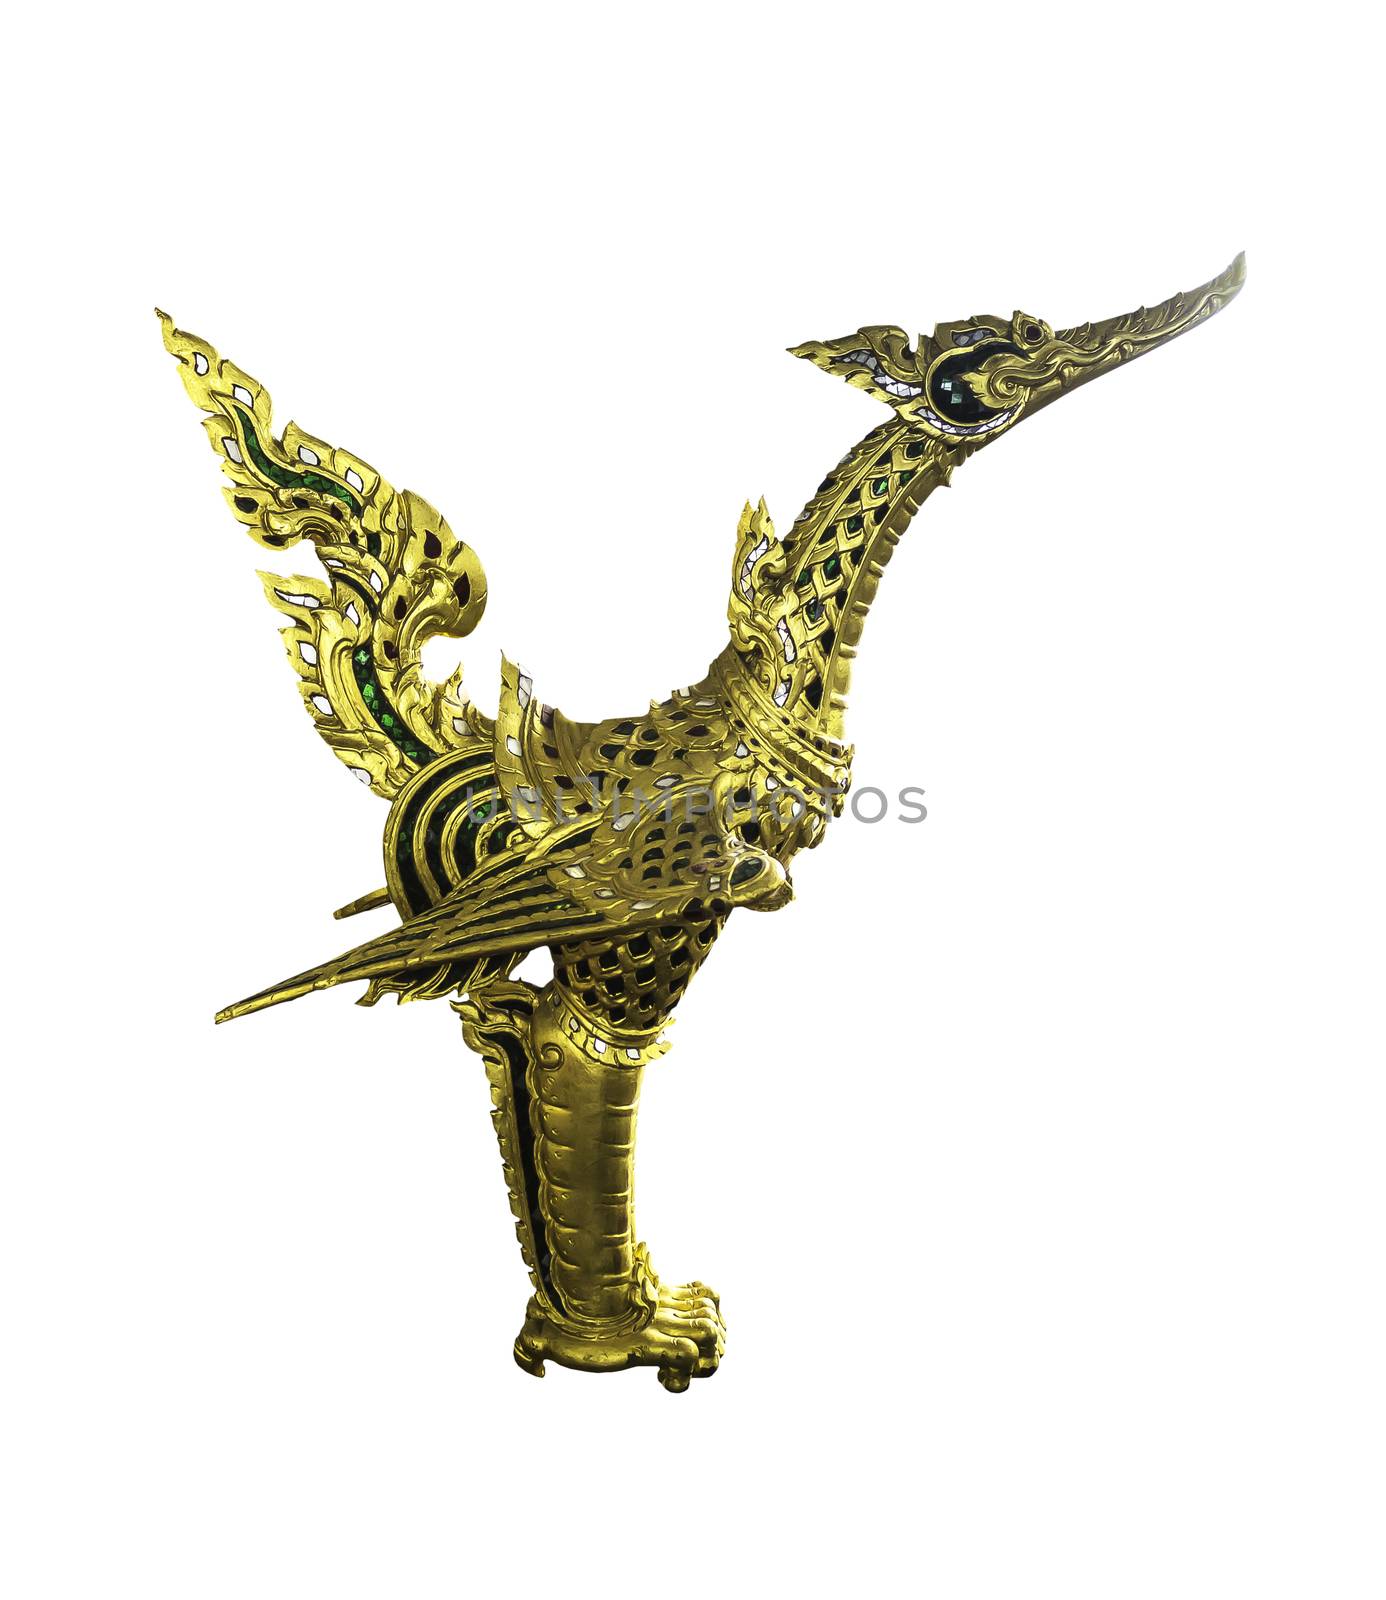 Swan statue style Thai art isolated on white with clipping path